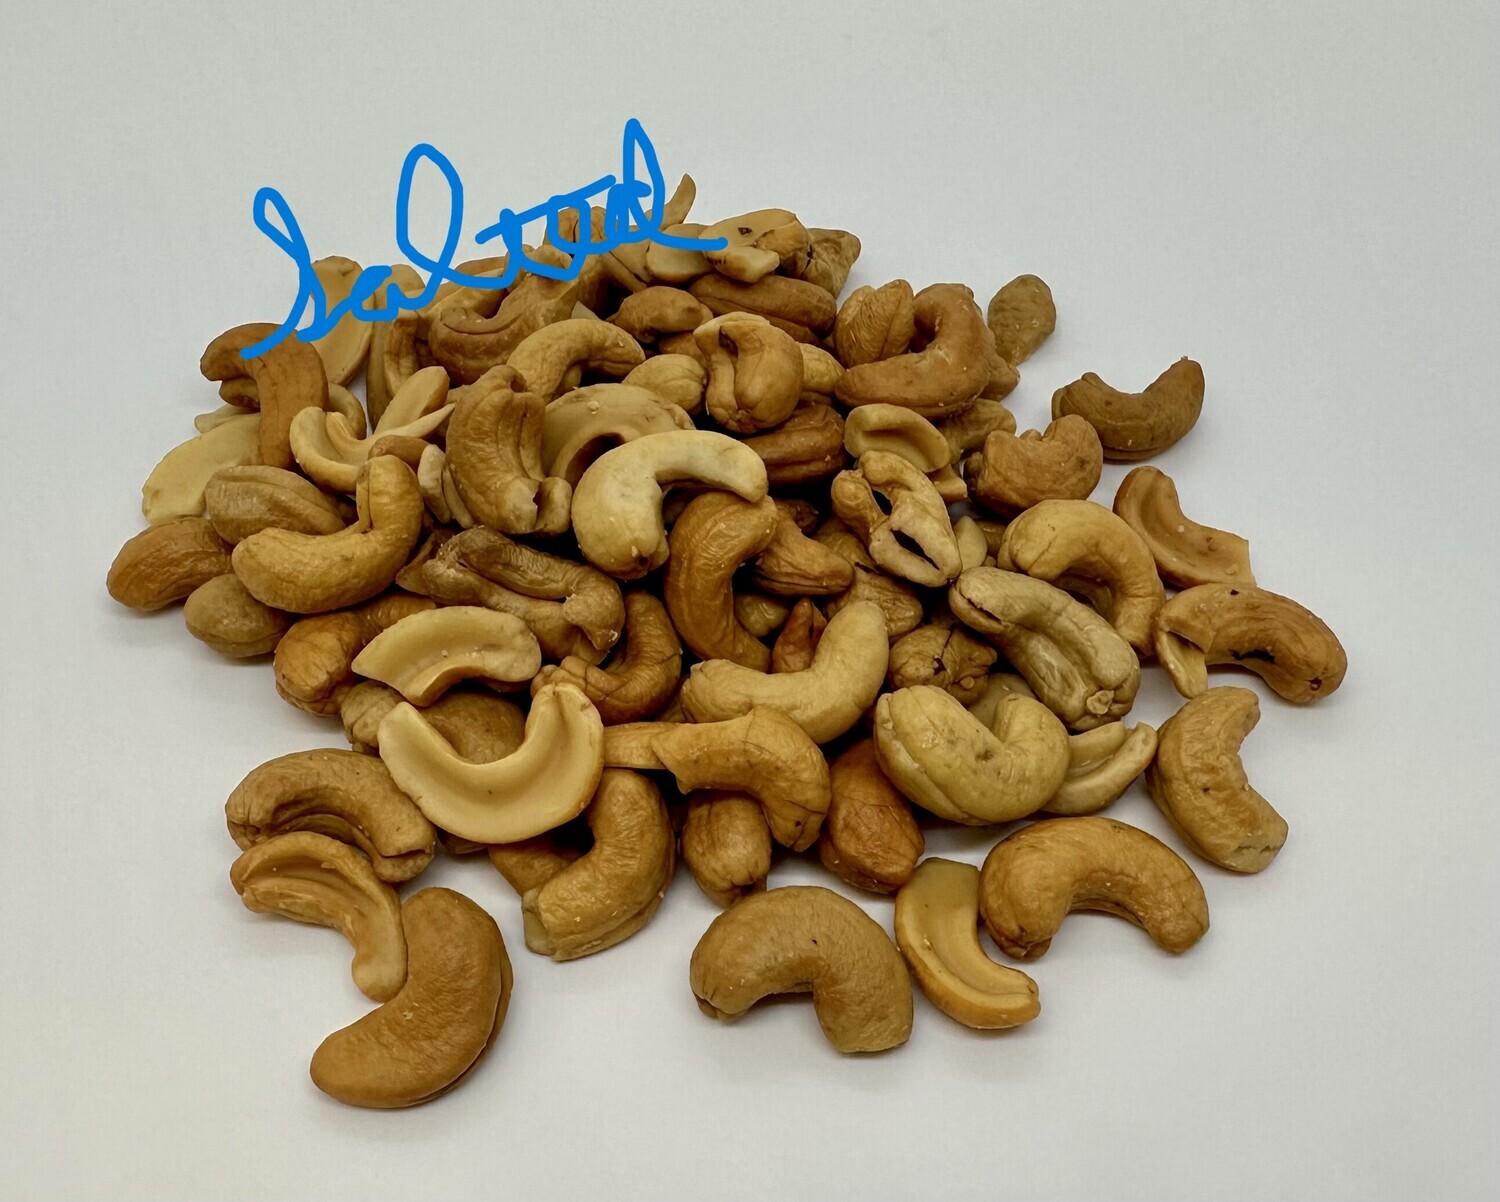 Box of Roasted Cashew Nuts 1 lb. Salted